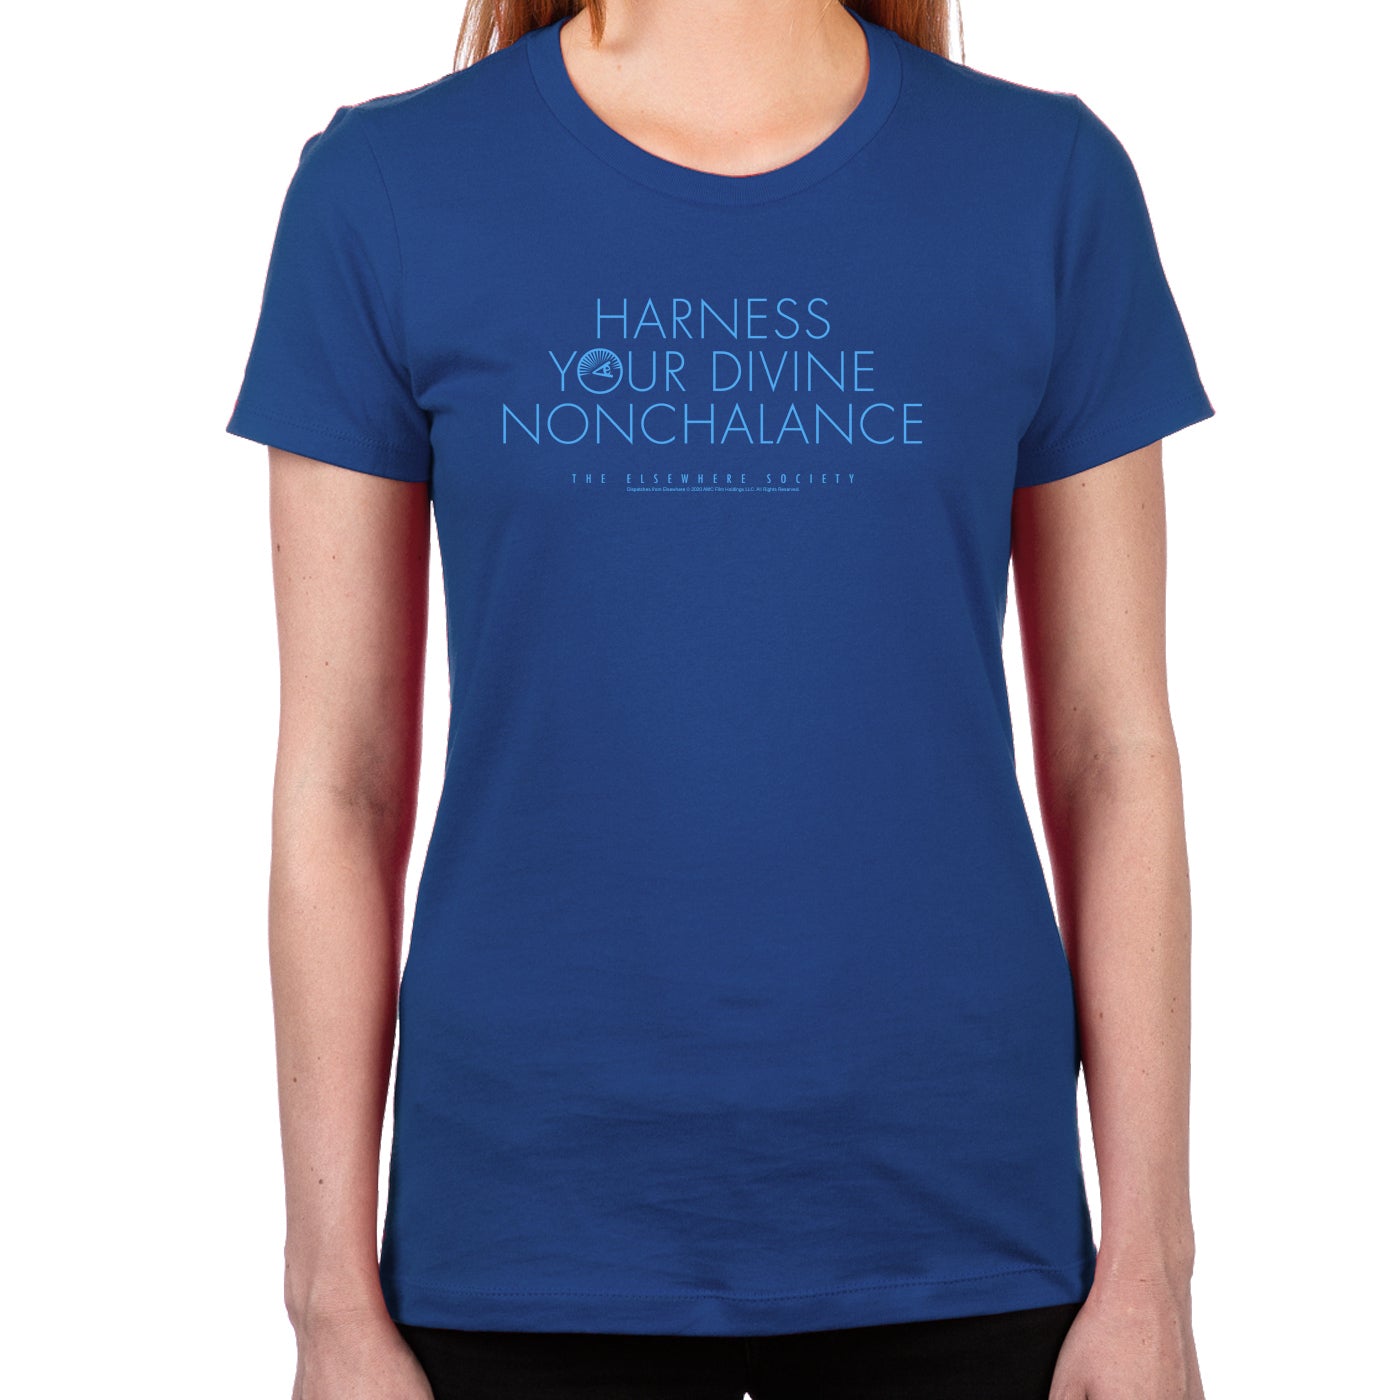 Dispatches From Elsewhere Harness Your Divine Nonchalance Women's T-Shirt